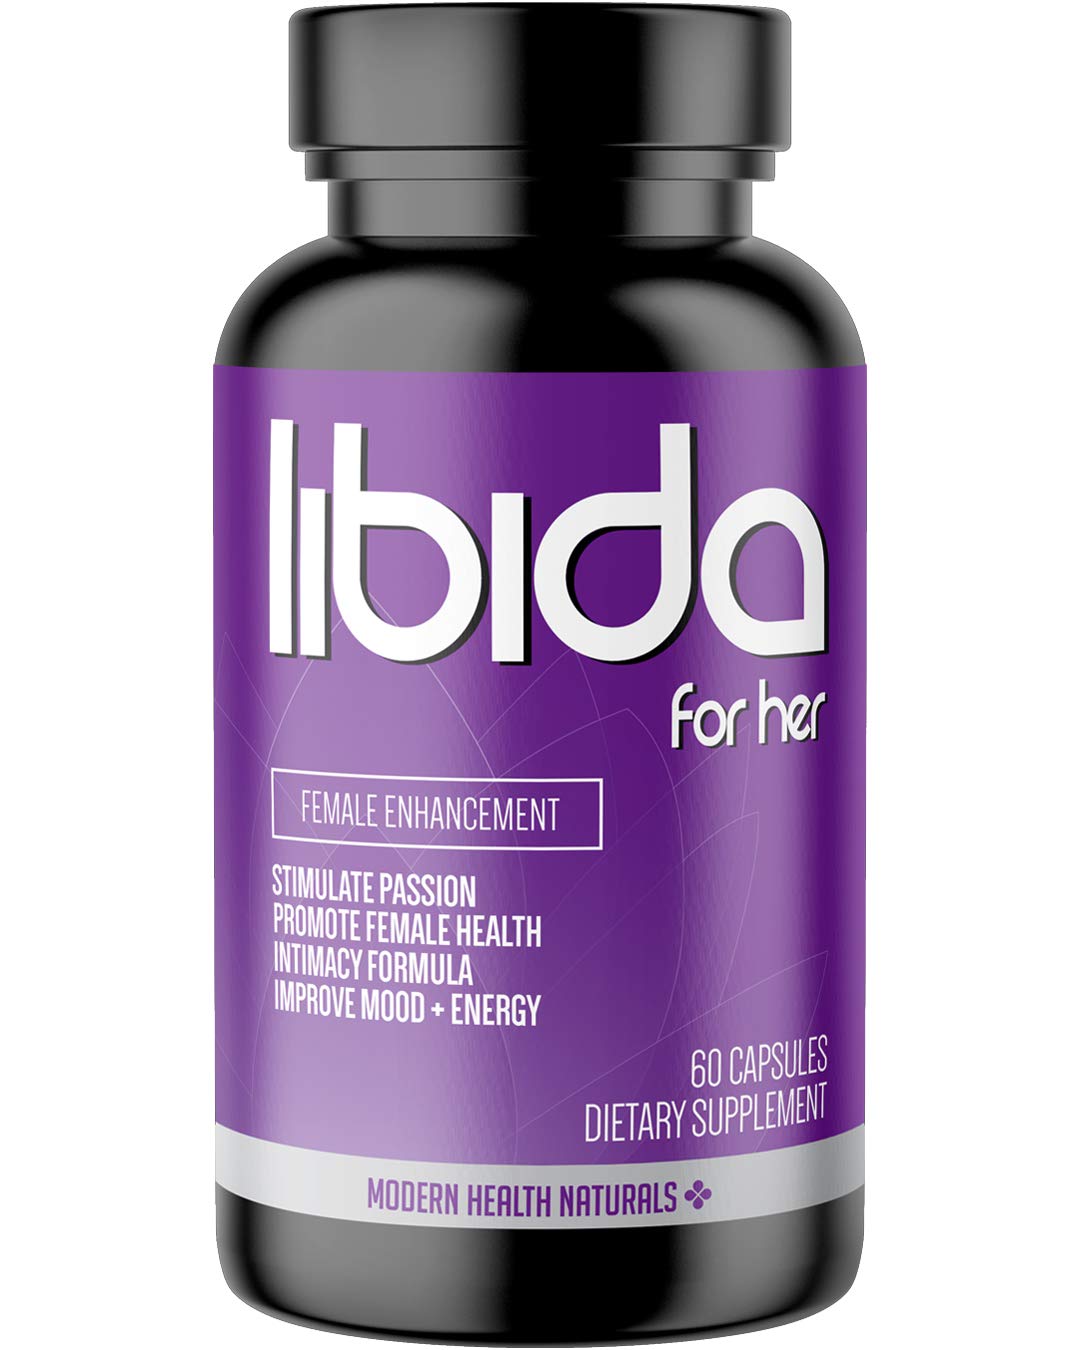 Libida for Her by Modern Health Naturals